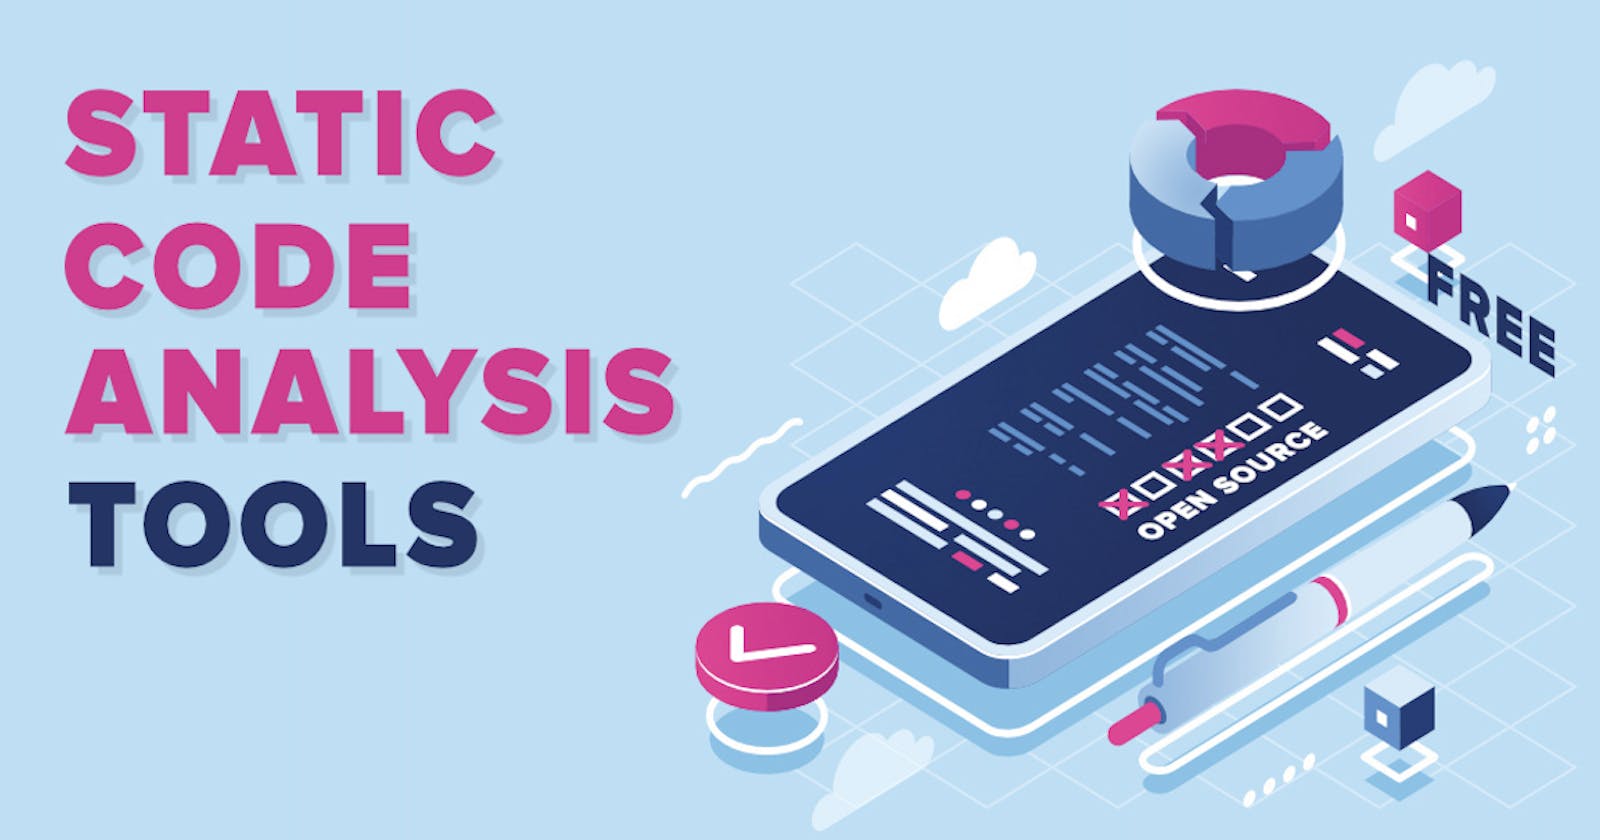 How do static analysis tools suffer from false negatives and false positives?